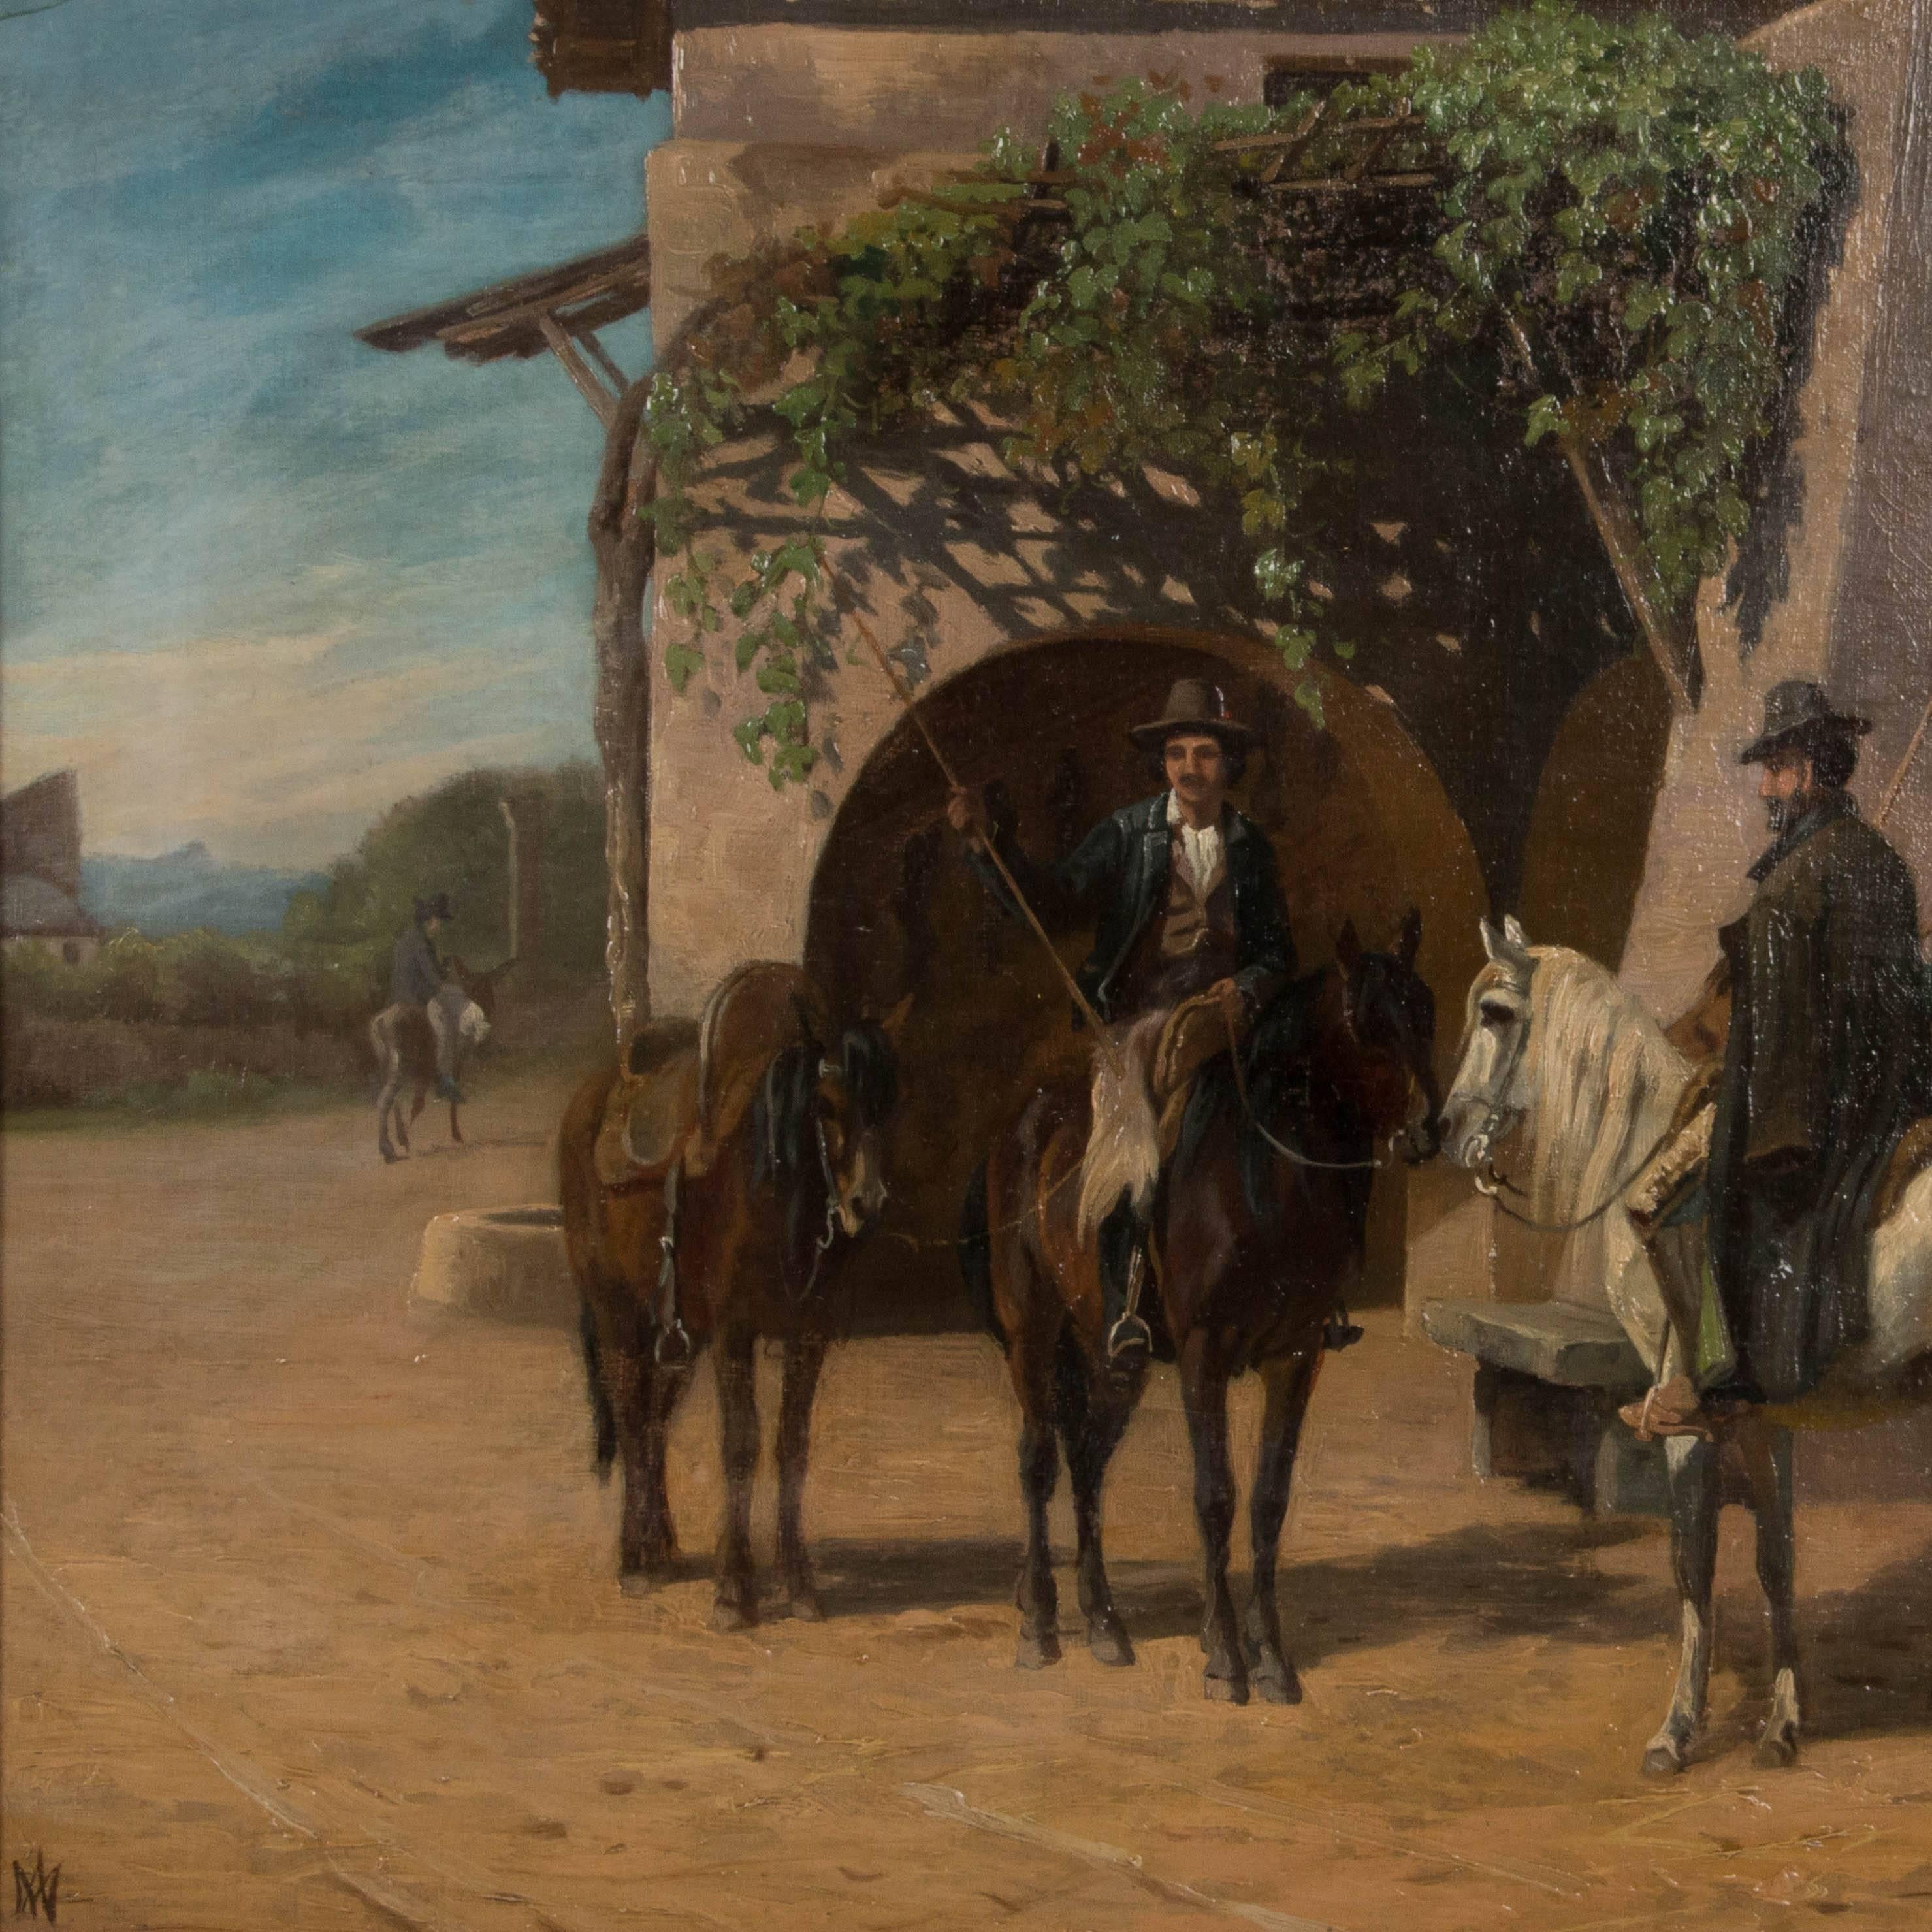 Original oil on canvas painting of three men on horseback talking on a village street, by Danish artist Adolf Henrik Mackeprang (1833-1911).
The painting is signed with a monogram AM in the lower left and mounted in a natural wood frame. Please take